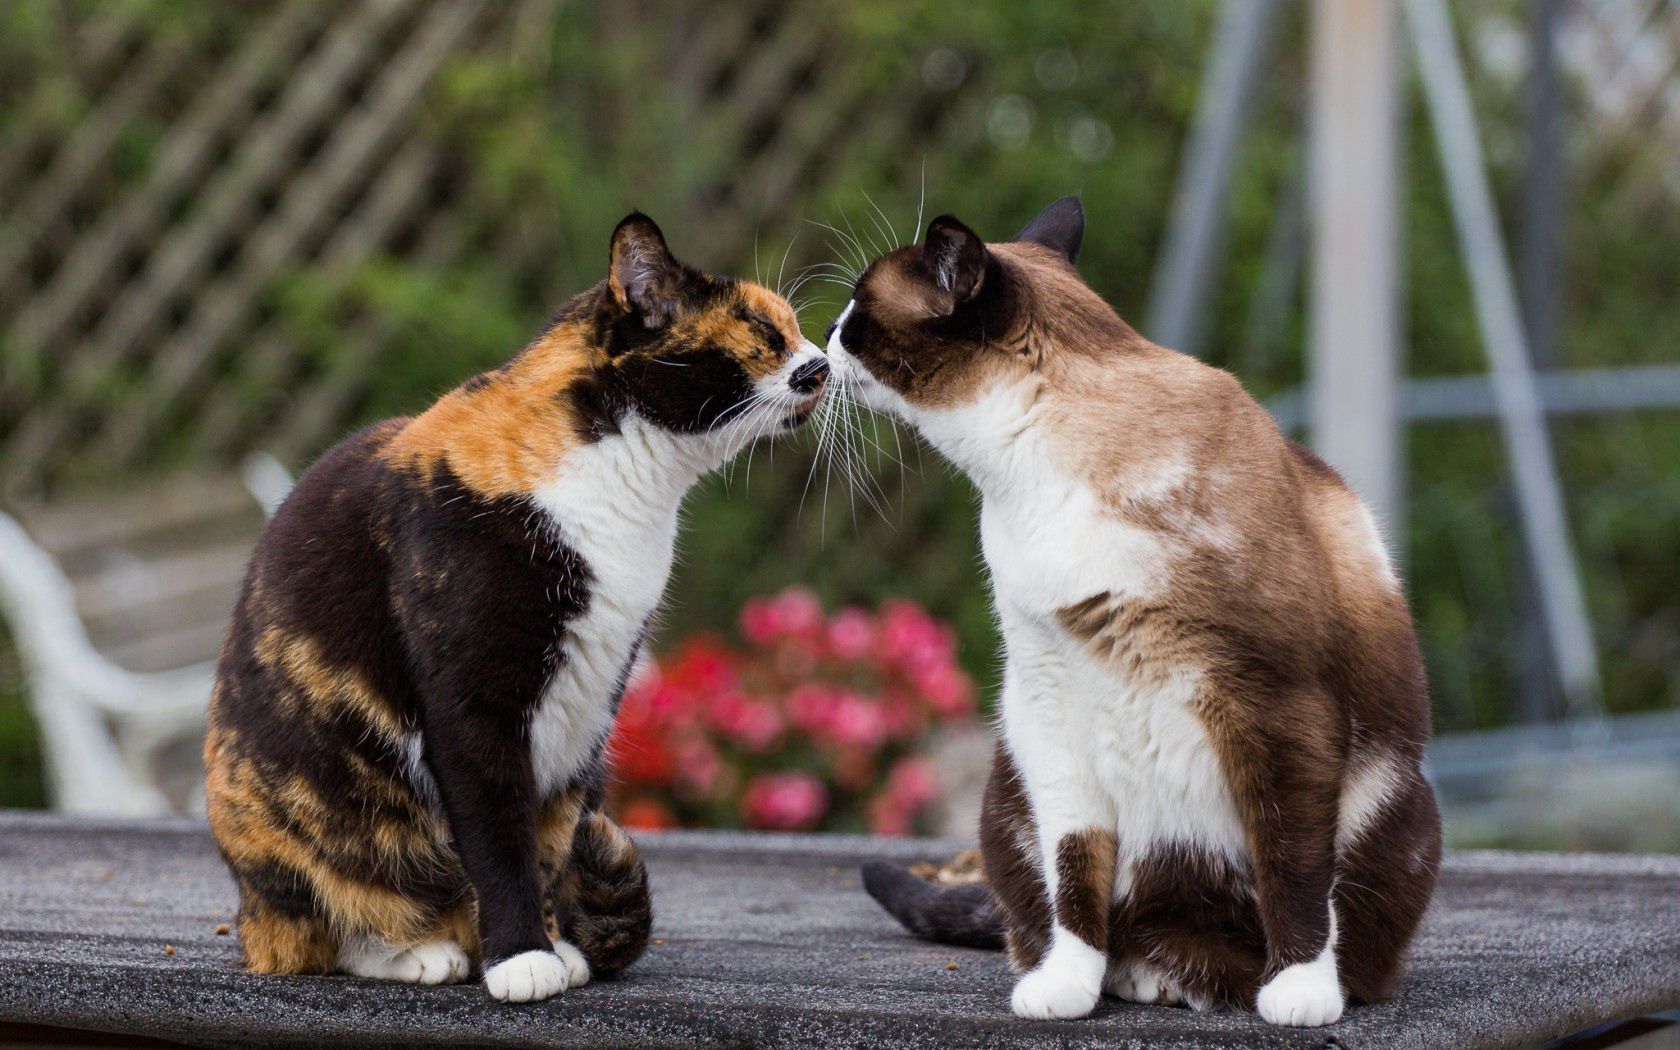 157956 download wallpaper animals, cats, tenderness, kiss screensavers and pictures for free